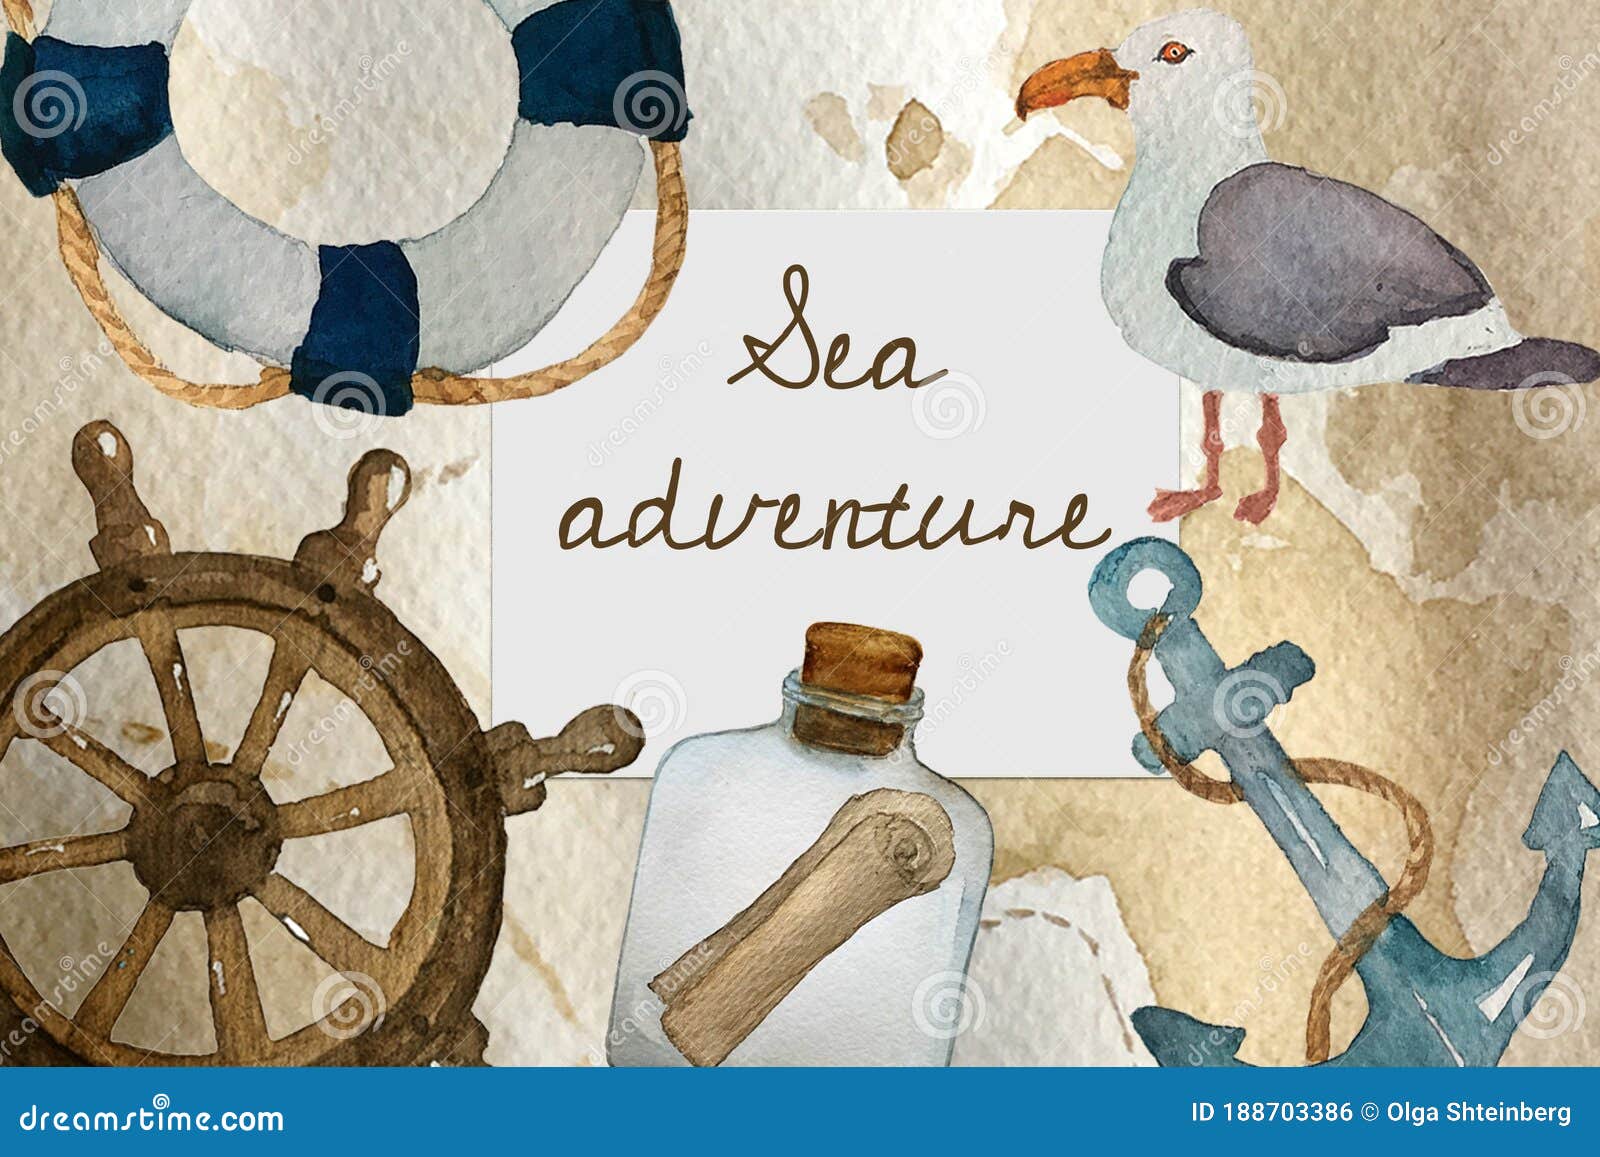 sea travel adventure watercolor poster  for summer vacation or children party game, retro hand drawn